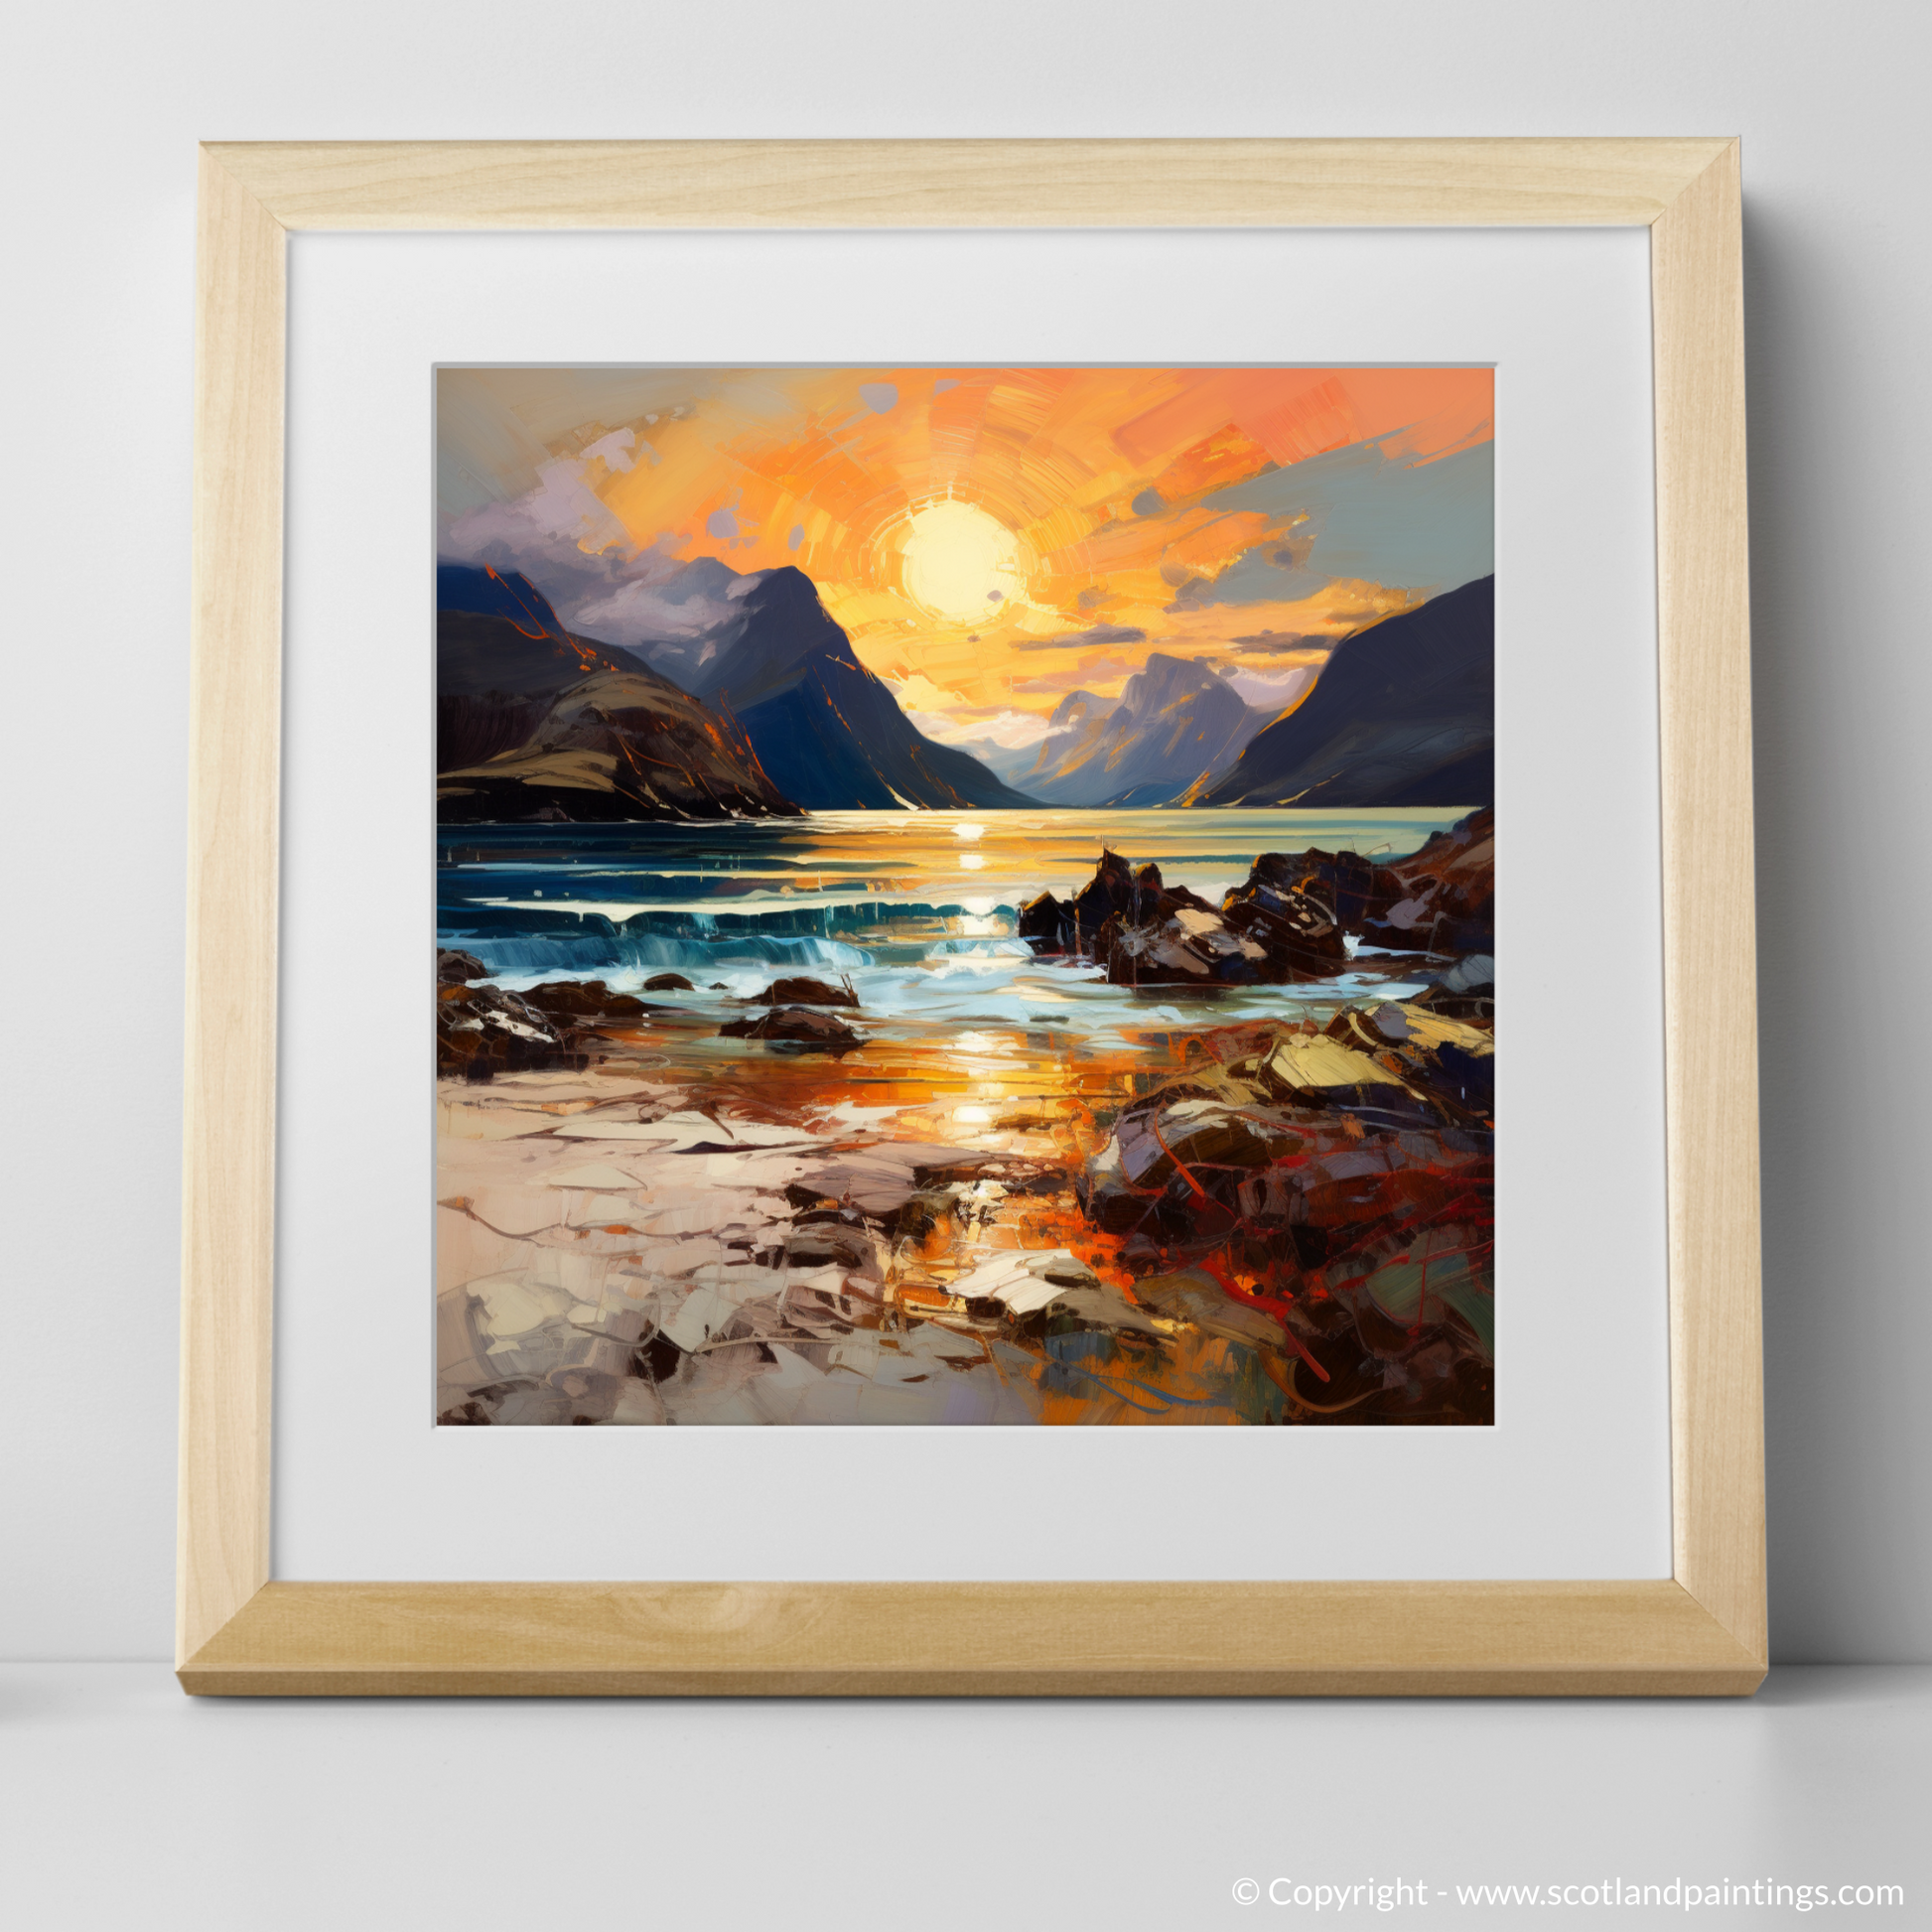 Art Print of Elgol Bay at sunset with a natural frame